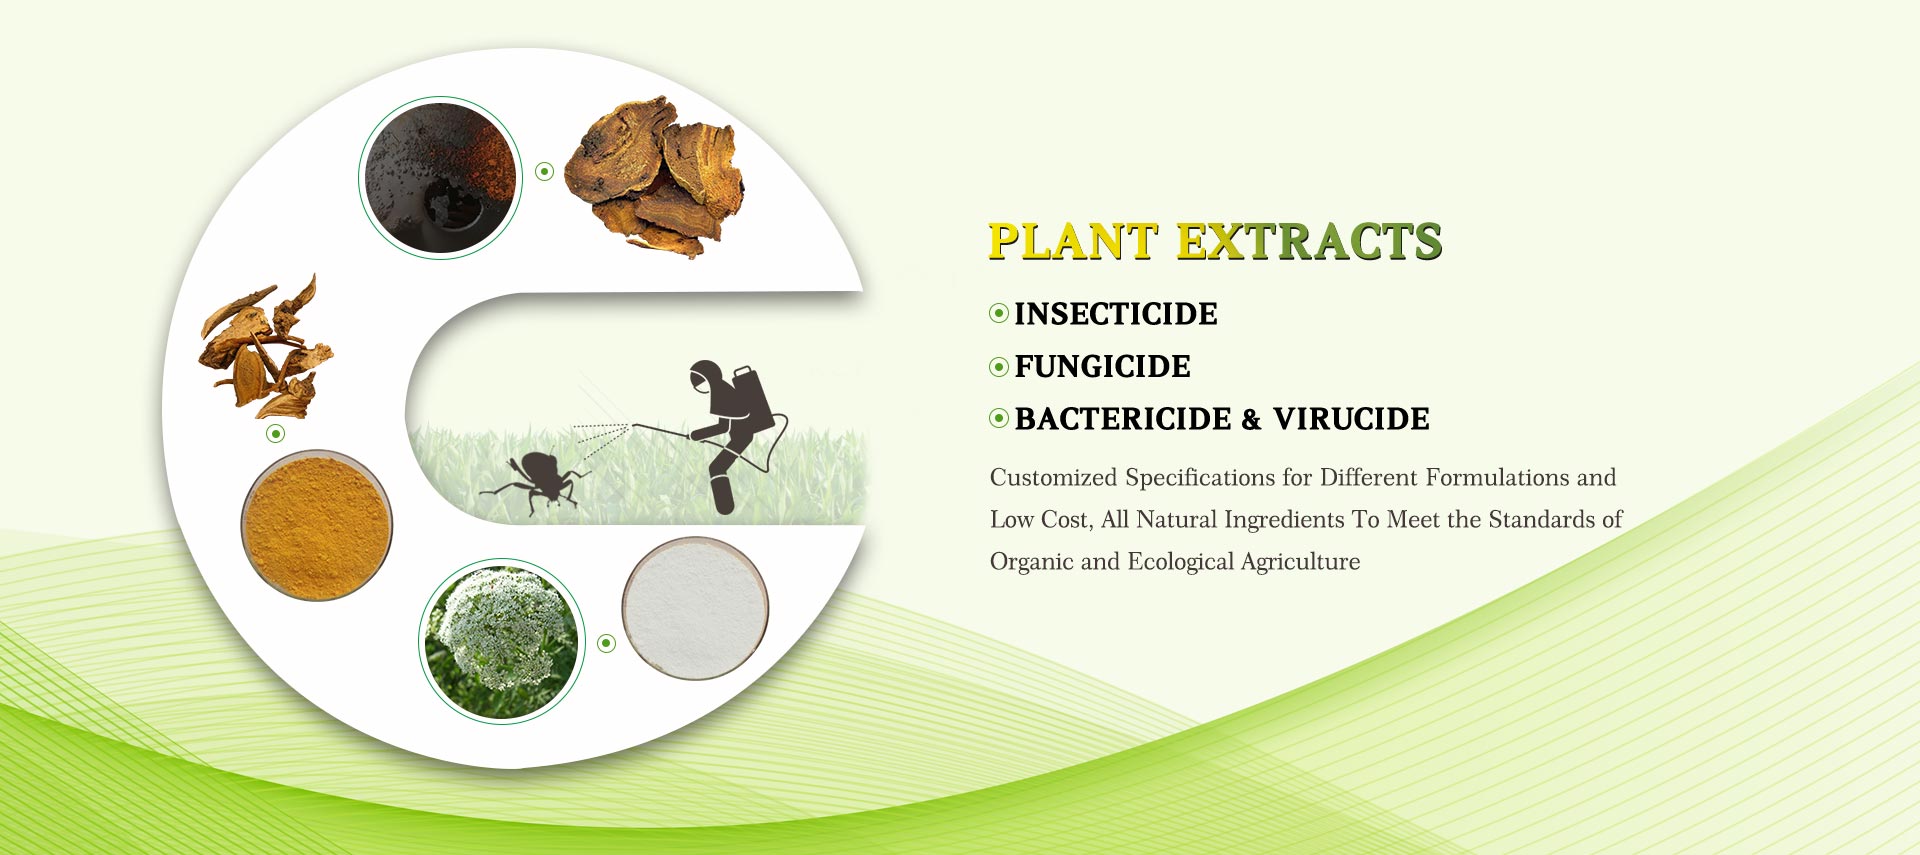 Plant Extracts for Insecticide, Fungicide, Bactericide & Virucide